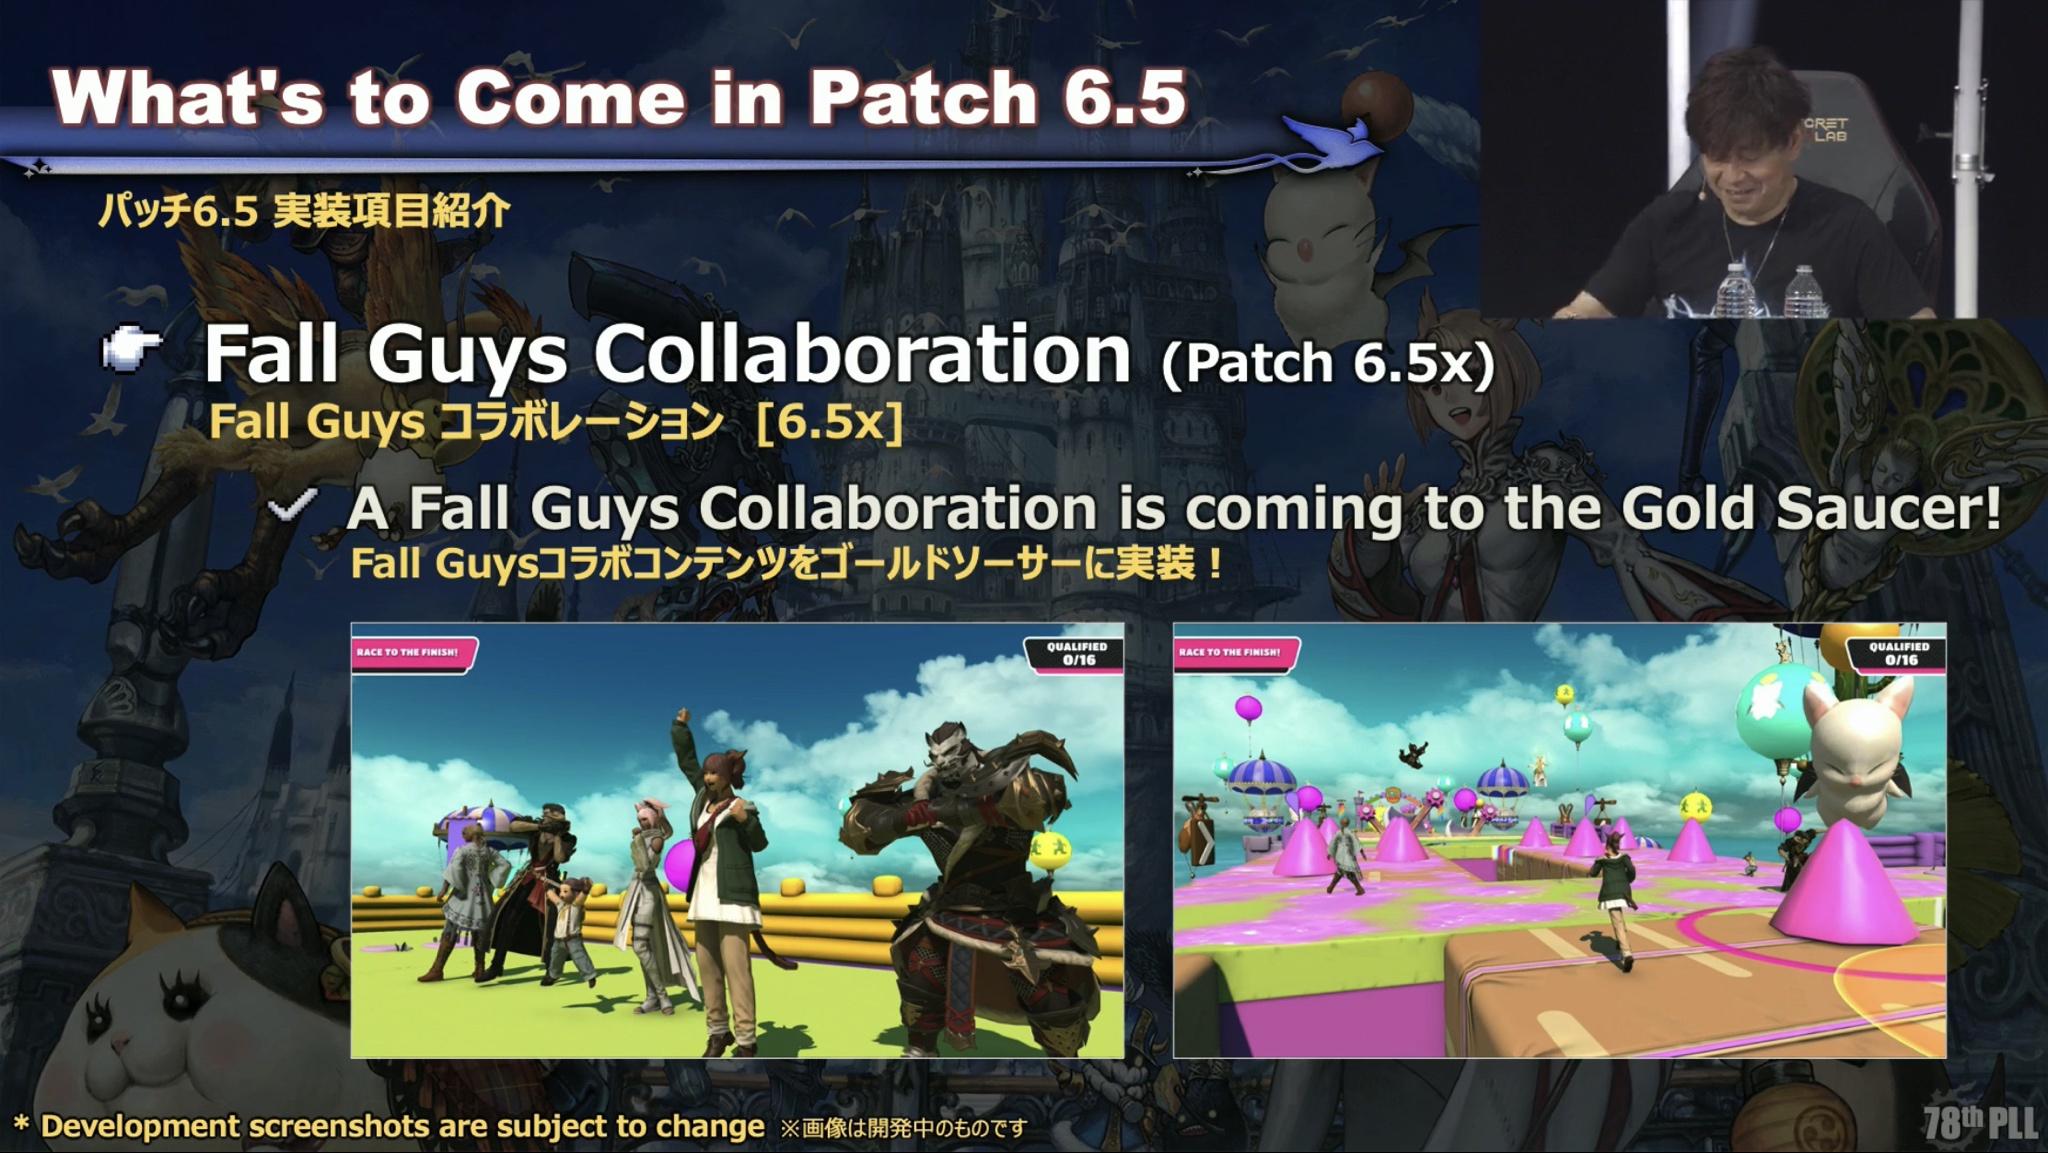 FFXIV - New Collaborations and Events in Patch 6.51 - News - Icy Veins